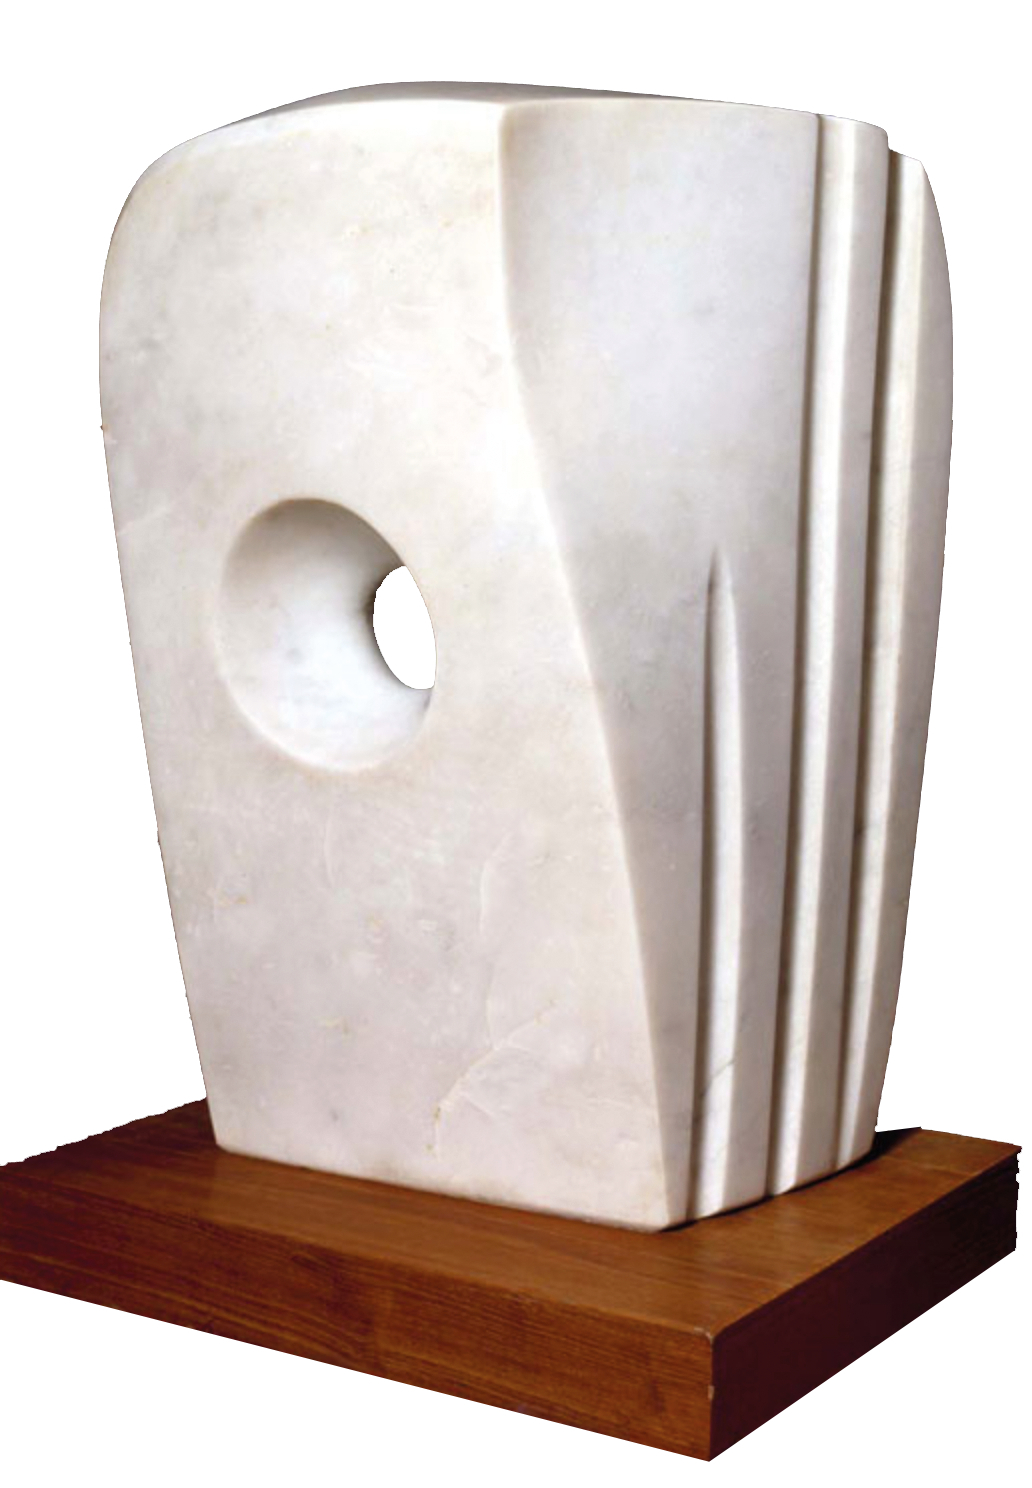 Stone sculpture with hole through centre